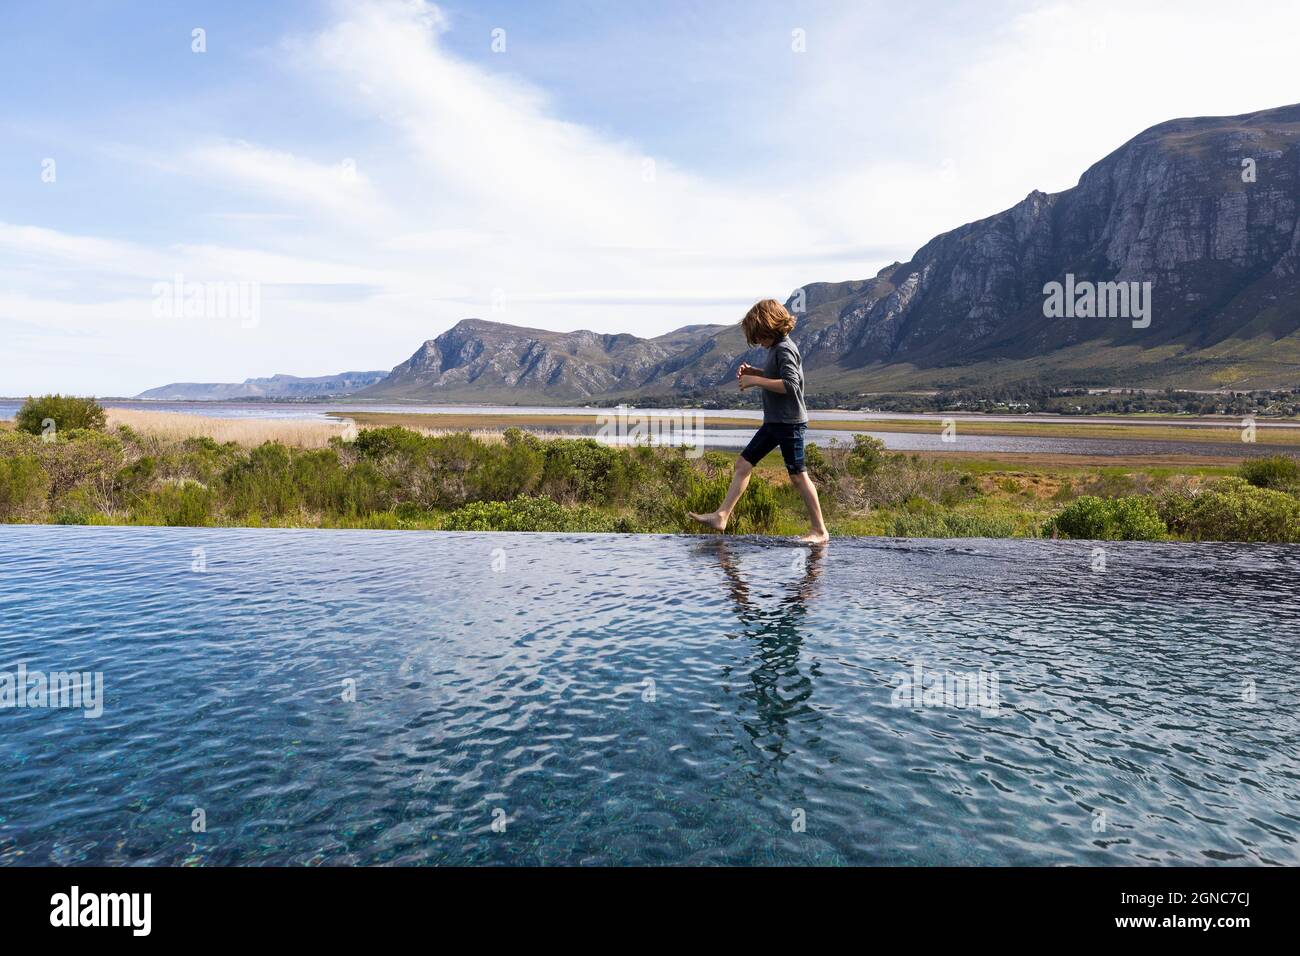 Eight year old boy walking around the edge of an infinity pool, a mountain backdrop Stock Photo